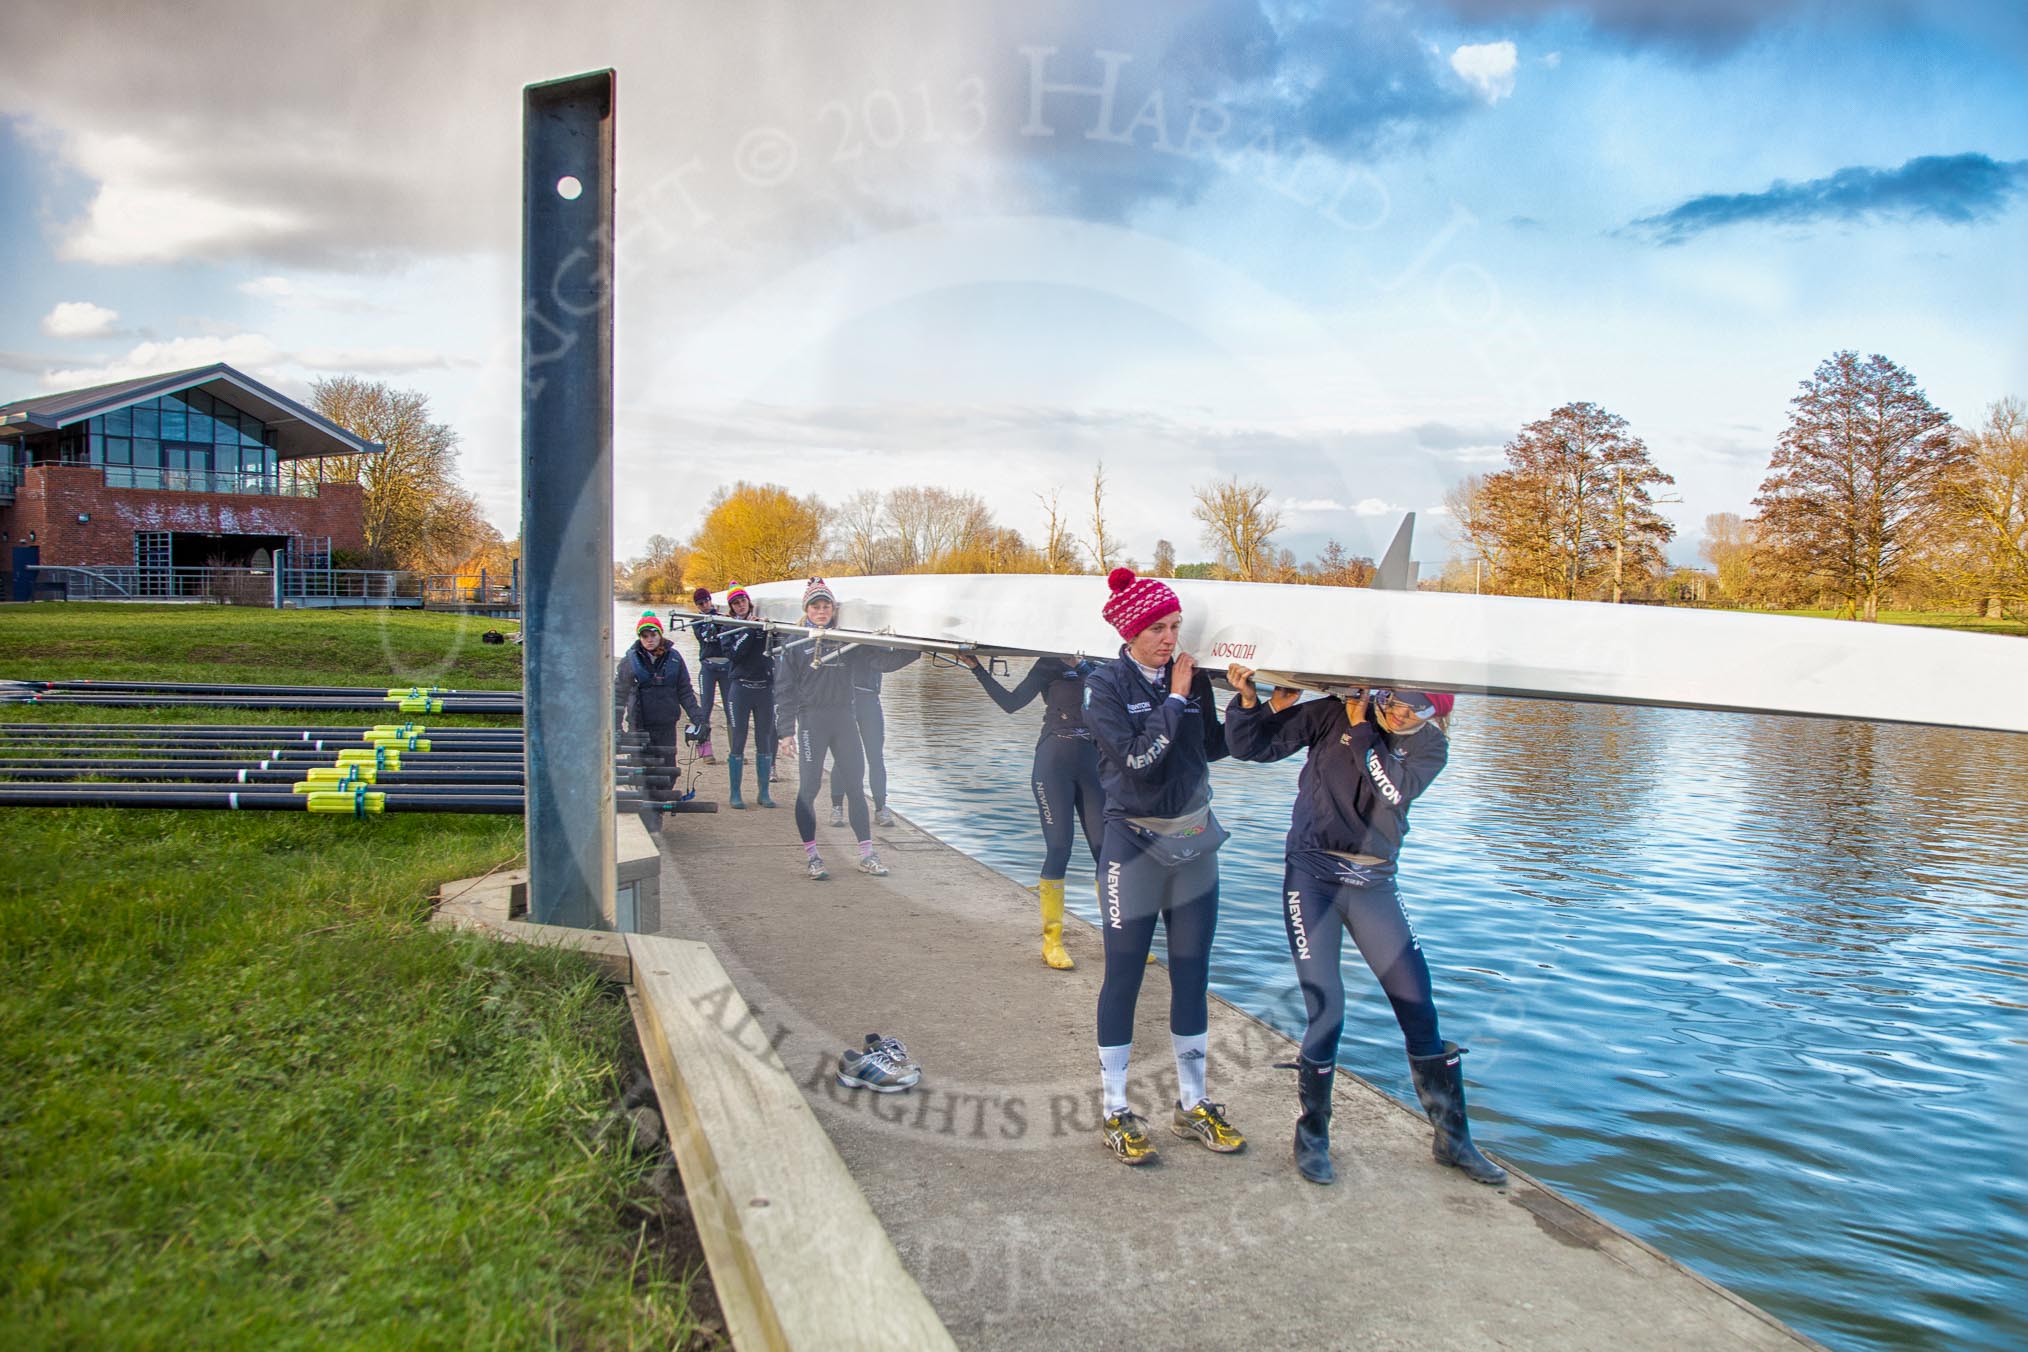 The Boat Race season 2013 - OUWBC training: The OUWBC Blue Boat squad getting ready at Fleming Boathouse - bow Mariann Novak, Alice Carrington-Windo, Mary Foord-Weston, Jo Lee, Amy Varney, Harriet Keane, Anastasia Chitty, stroke Maxie Scheske, and cox Katie Apfelbaum on the left..
Fleming Boathouse,
Wallingford,
Oxfordshire,
United Kingdom,
on 13 March 2013 at 16:49, image #16